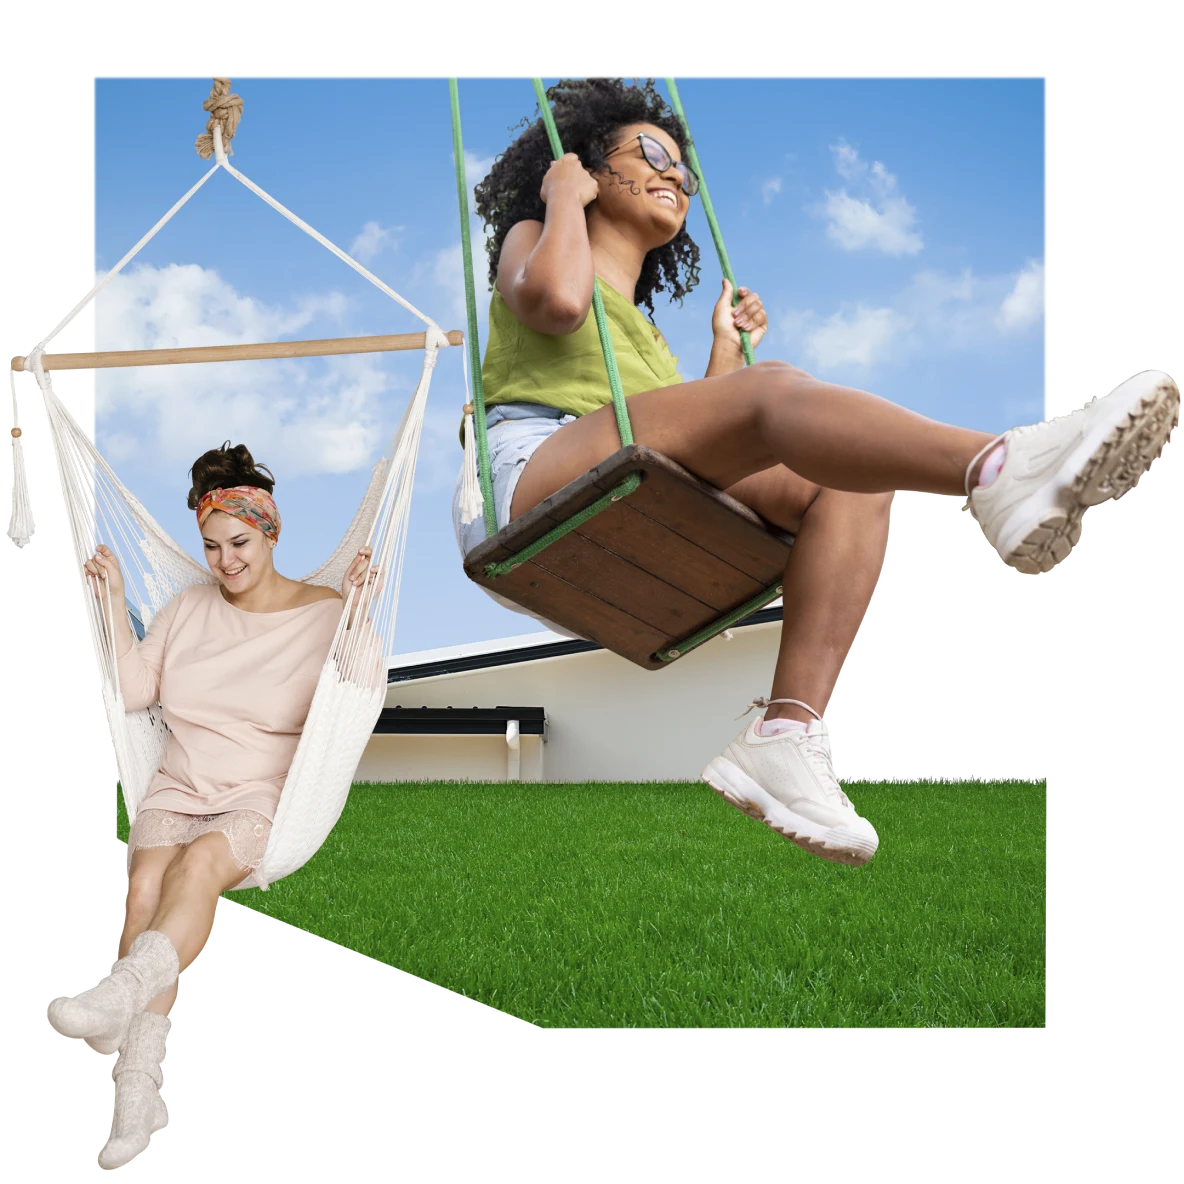 Woman in pink on a hanging chair swing on the left, kicking up a leg. Woman on the right is in a green top and white shorts on a wooden swing with green handles. Blue sky in the background, bright green grass at the bottom.